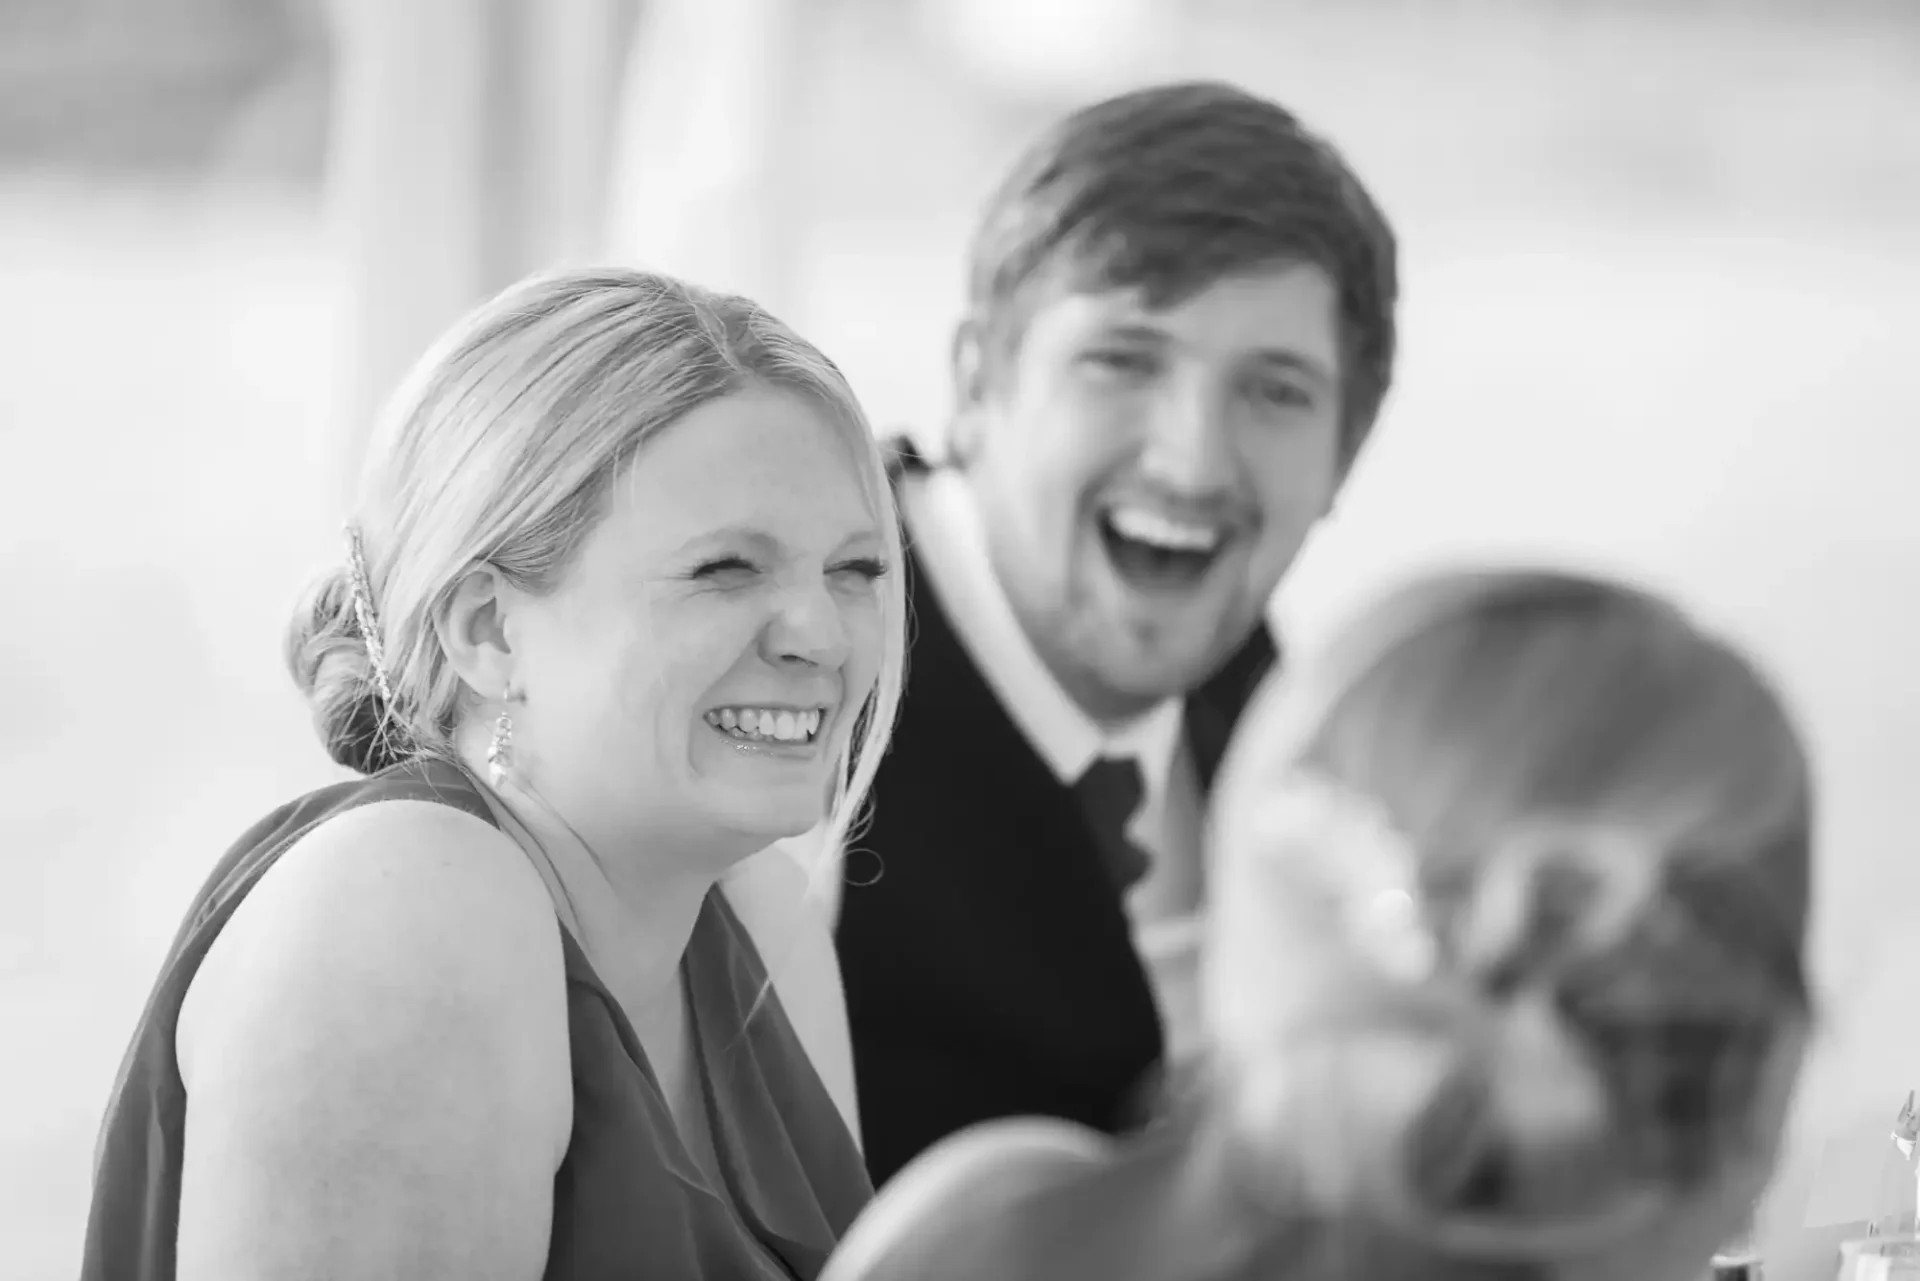 Two people laughing at a social event, captured in black and white, with a focus on a smiling woman and a man behind her.